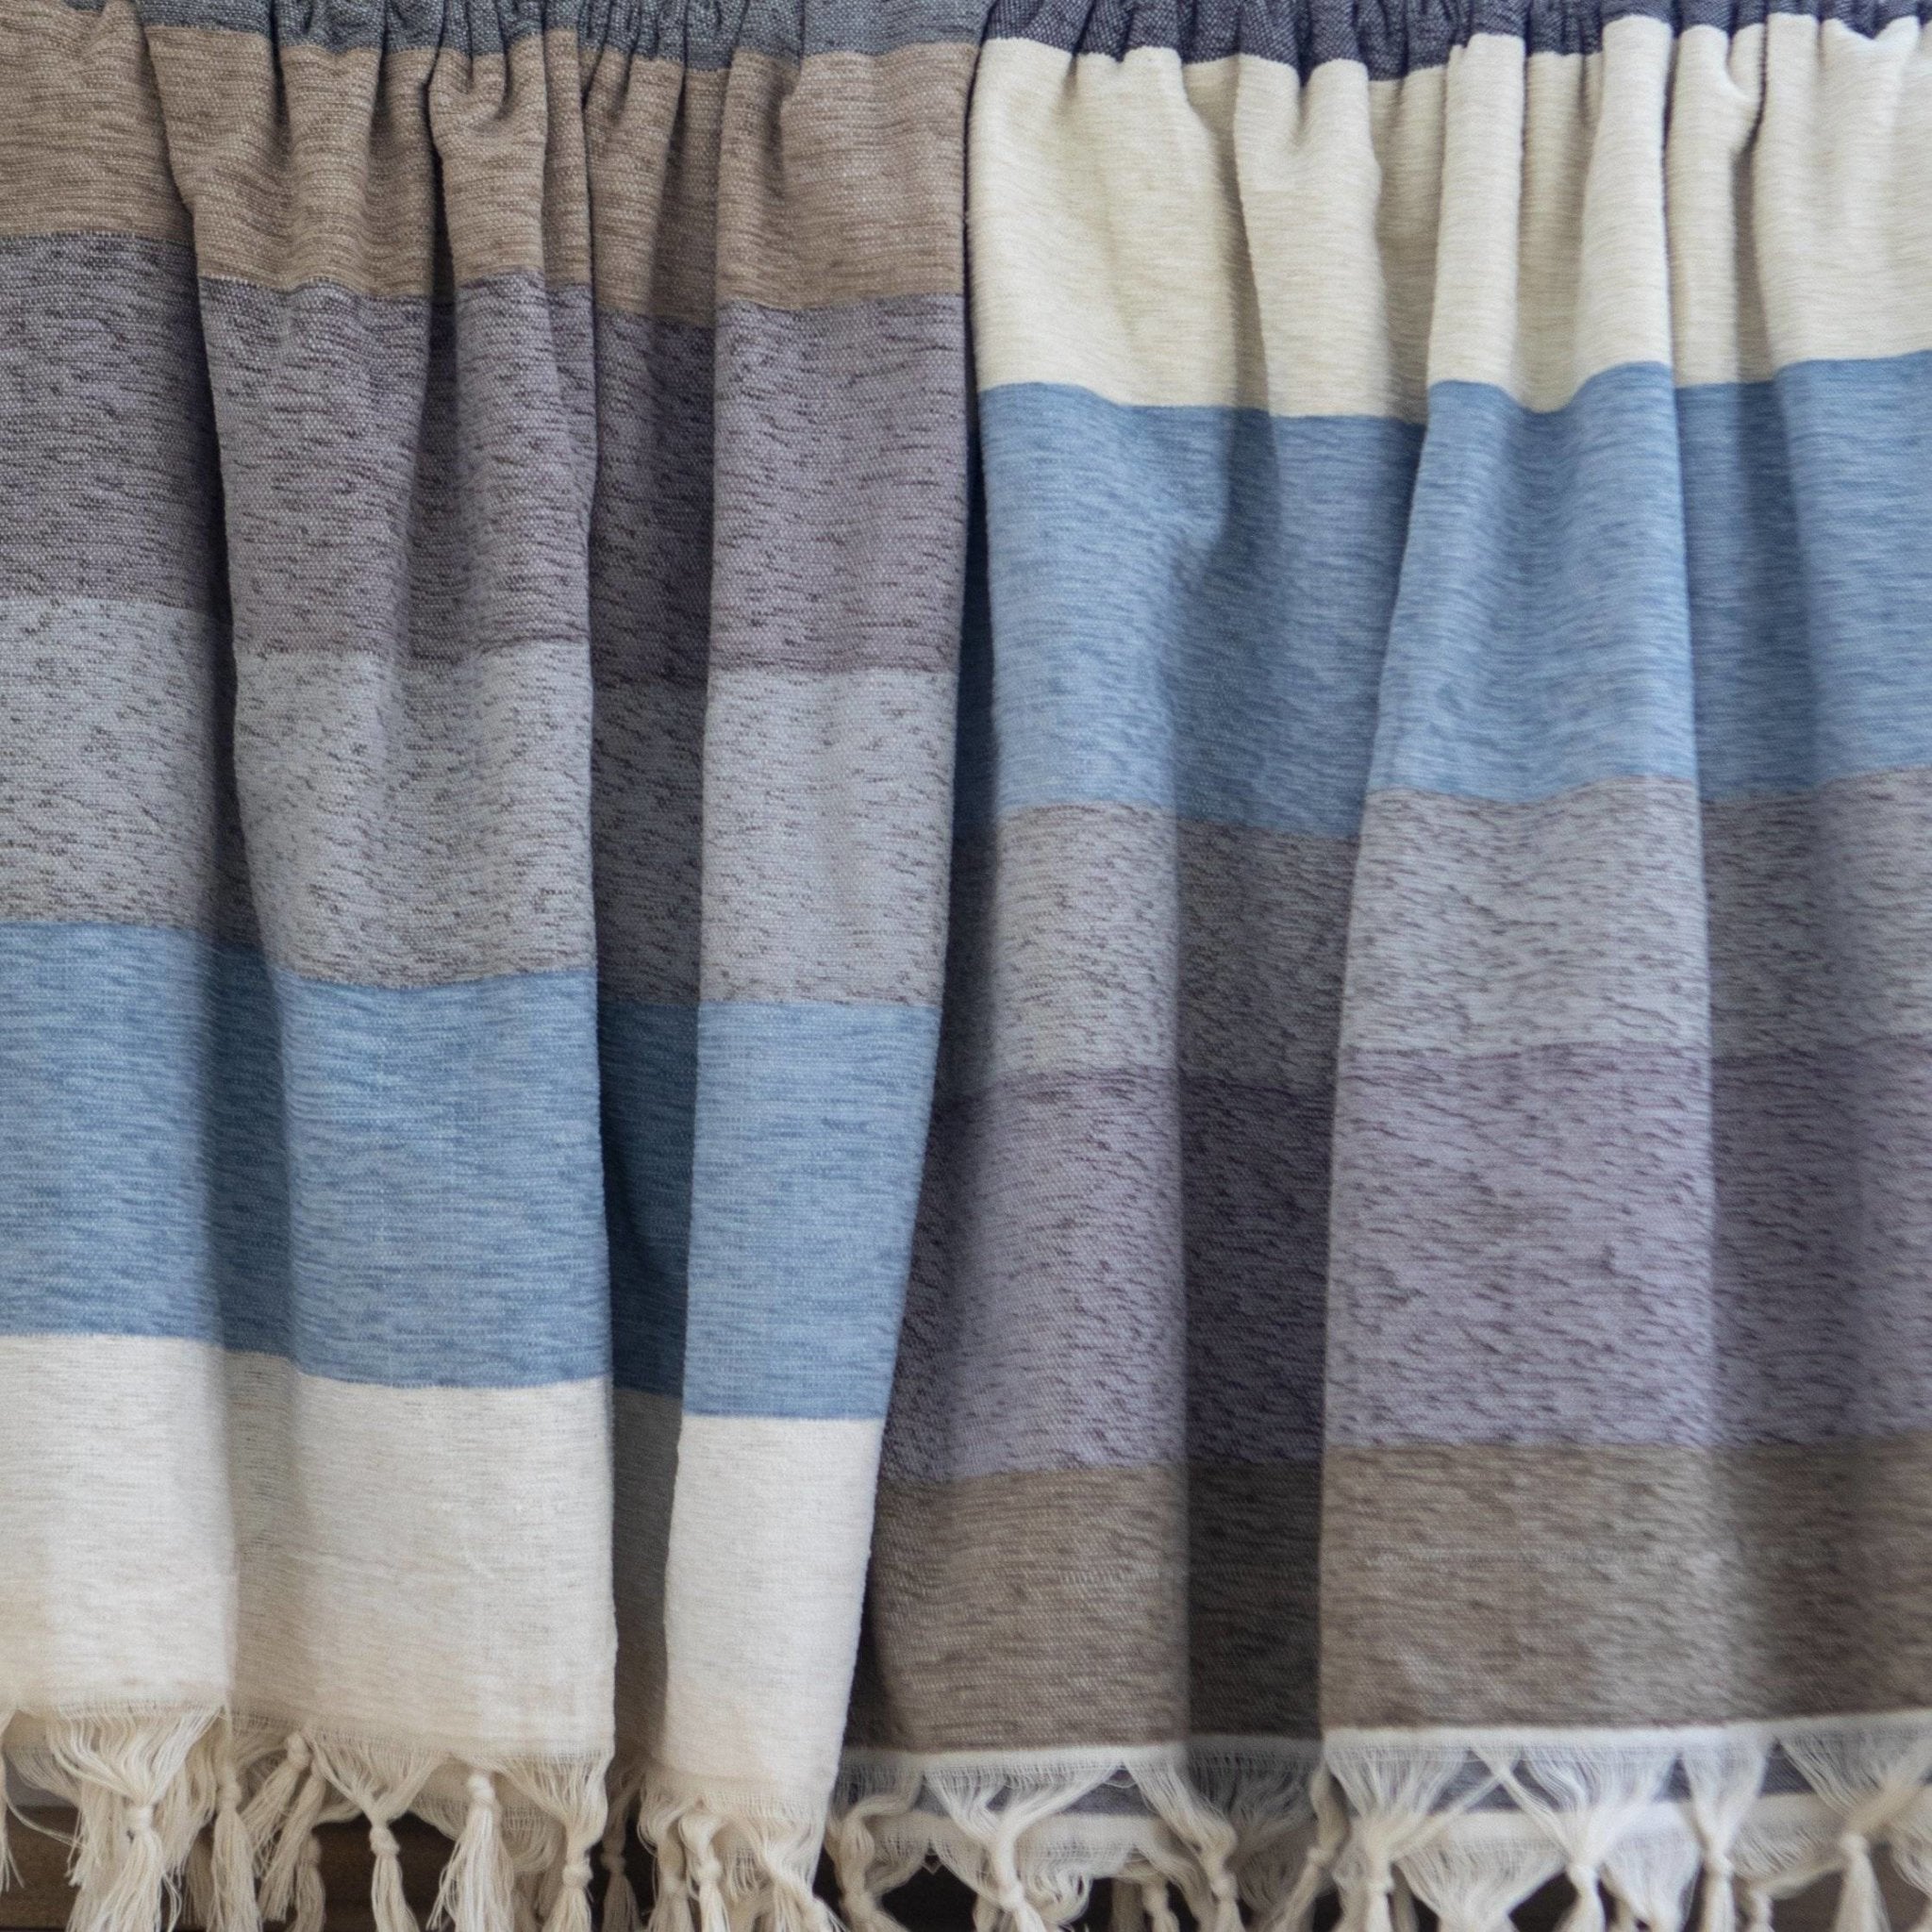 Hand-Woven Blanket - Tranquility - Near East Imports